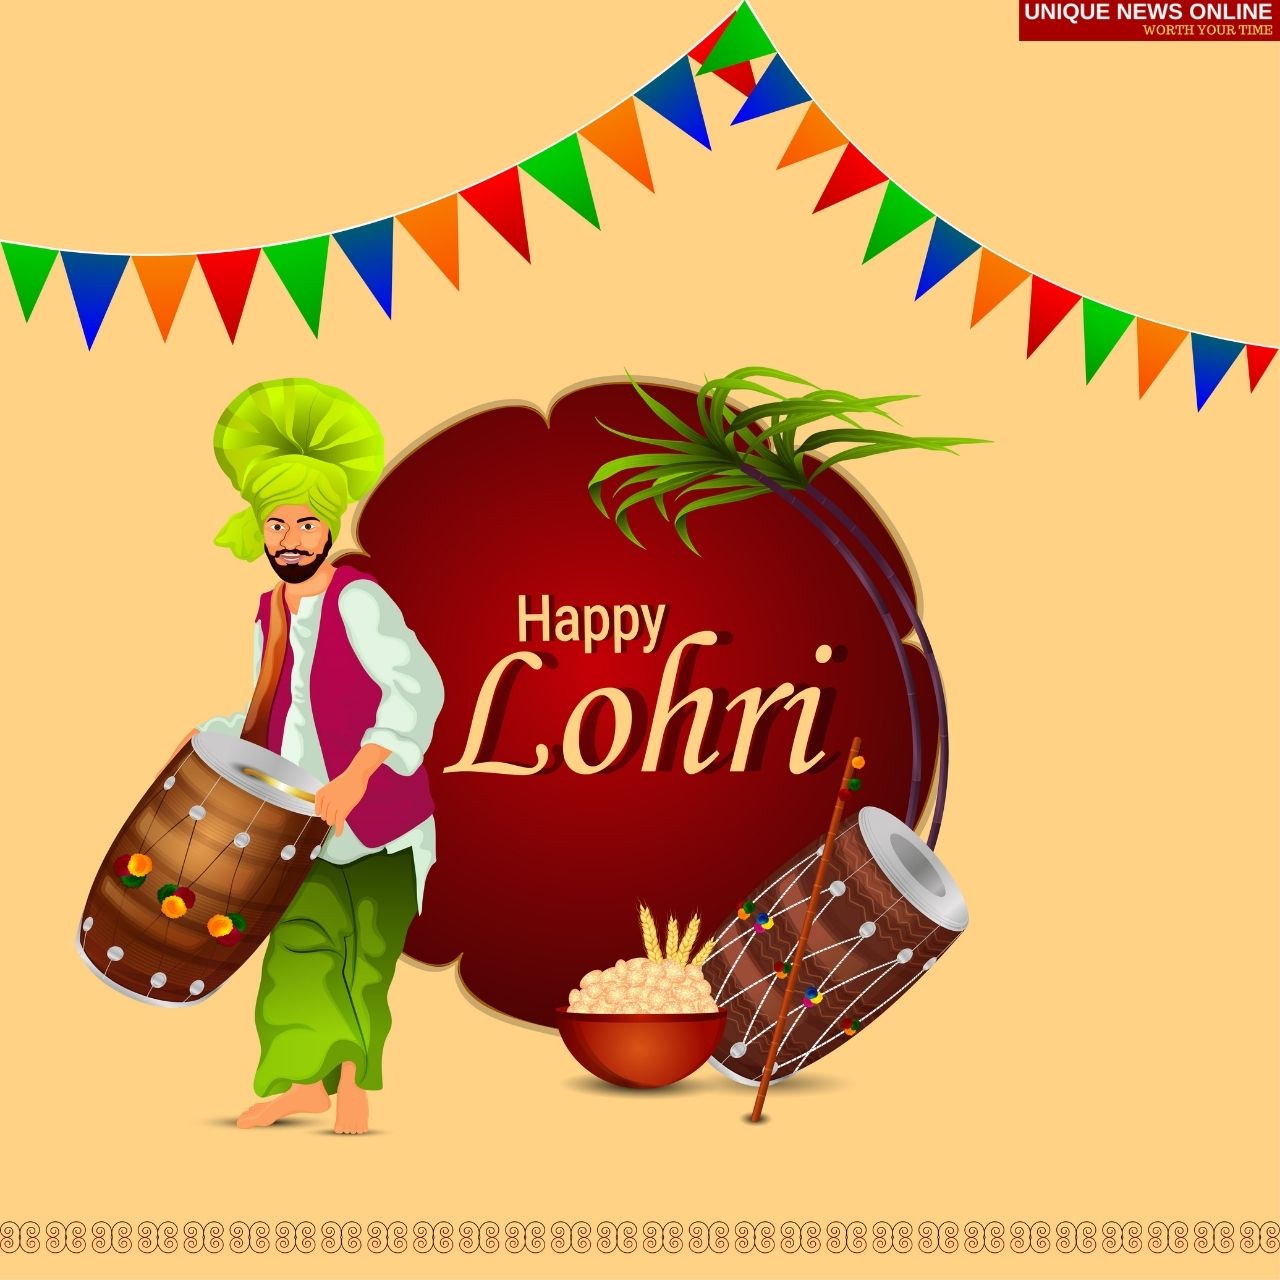 Lohri 2022 Posters, Banners, Background, Wallpapers, Stickers, Drawings, DP to Download